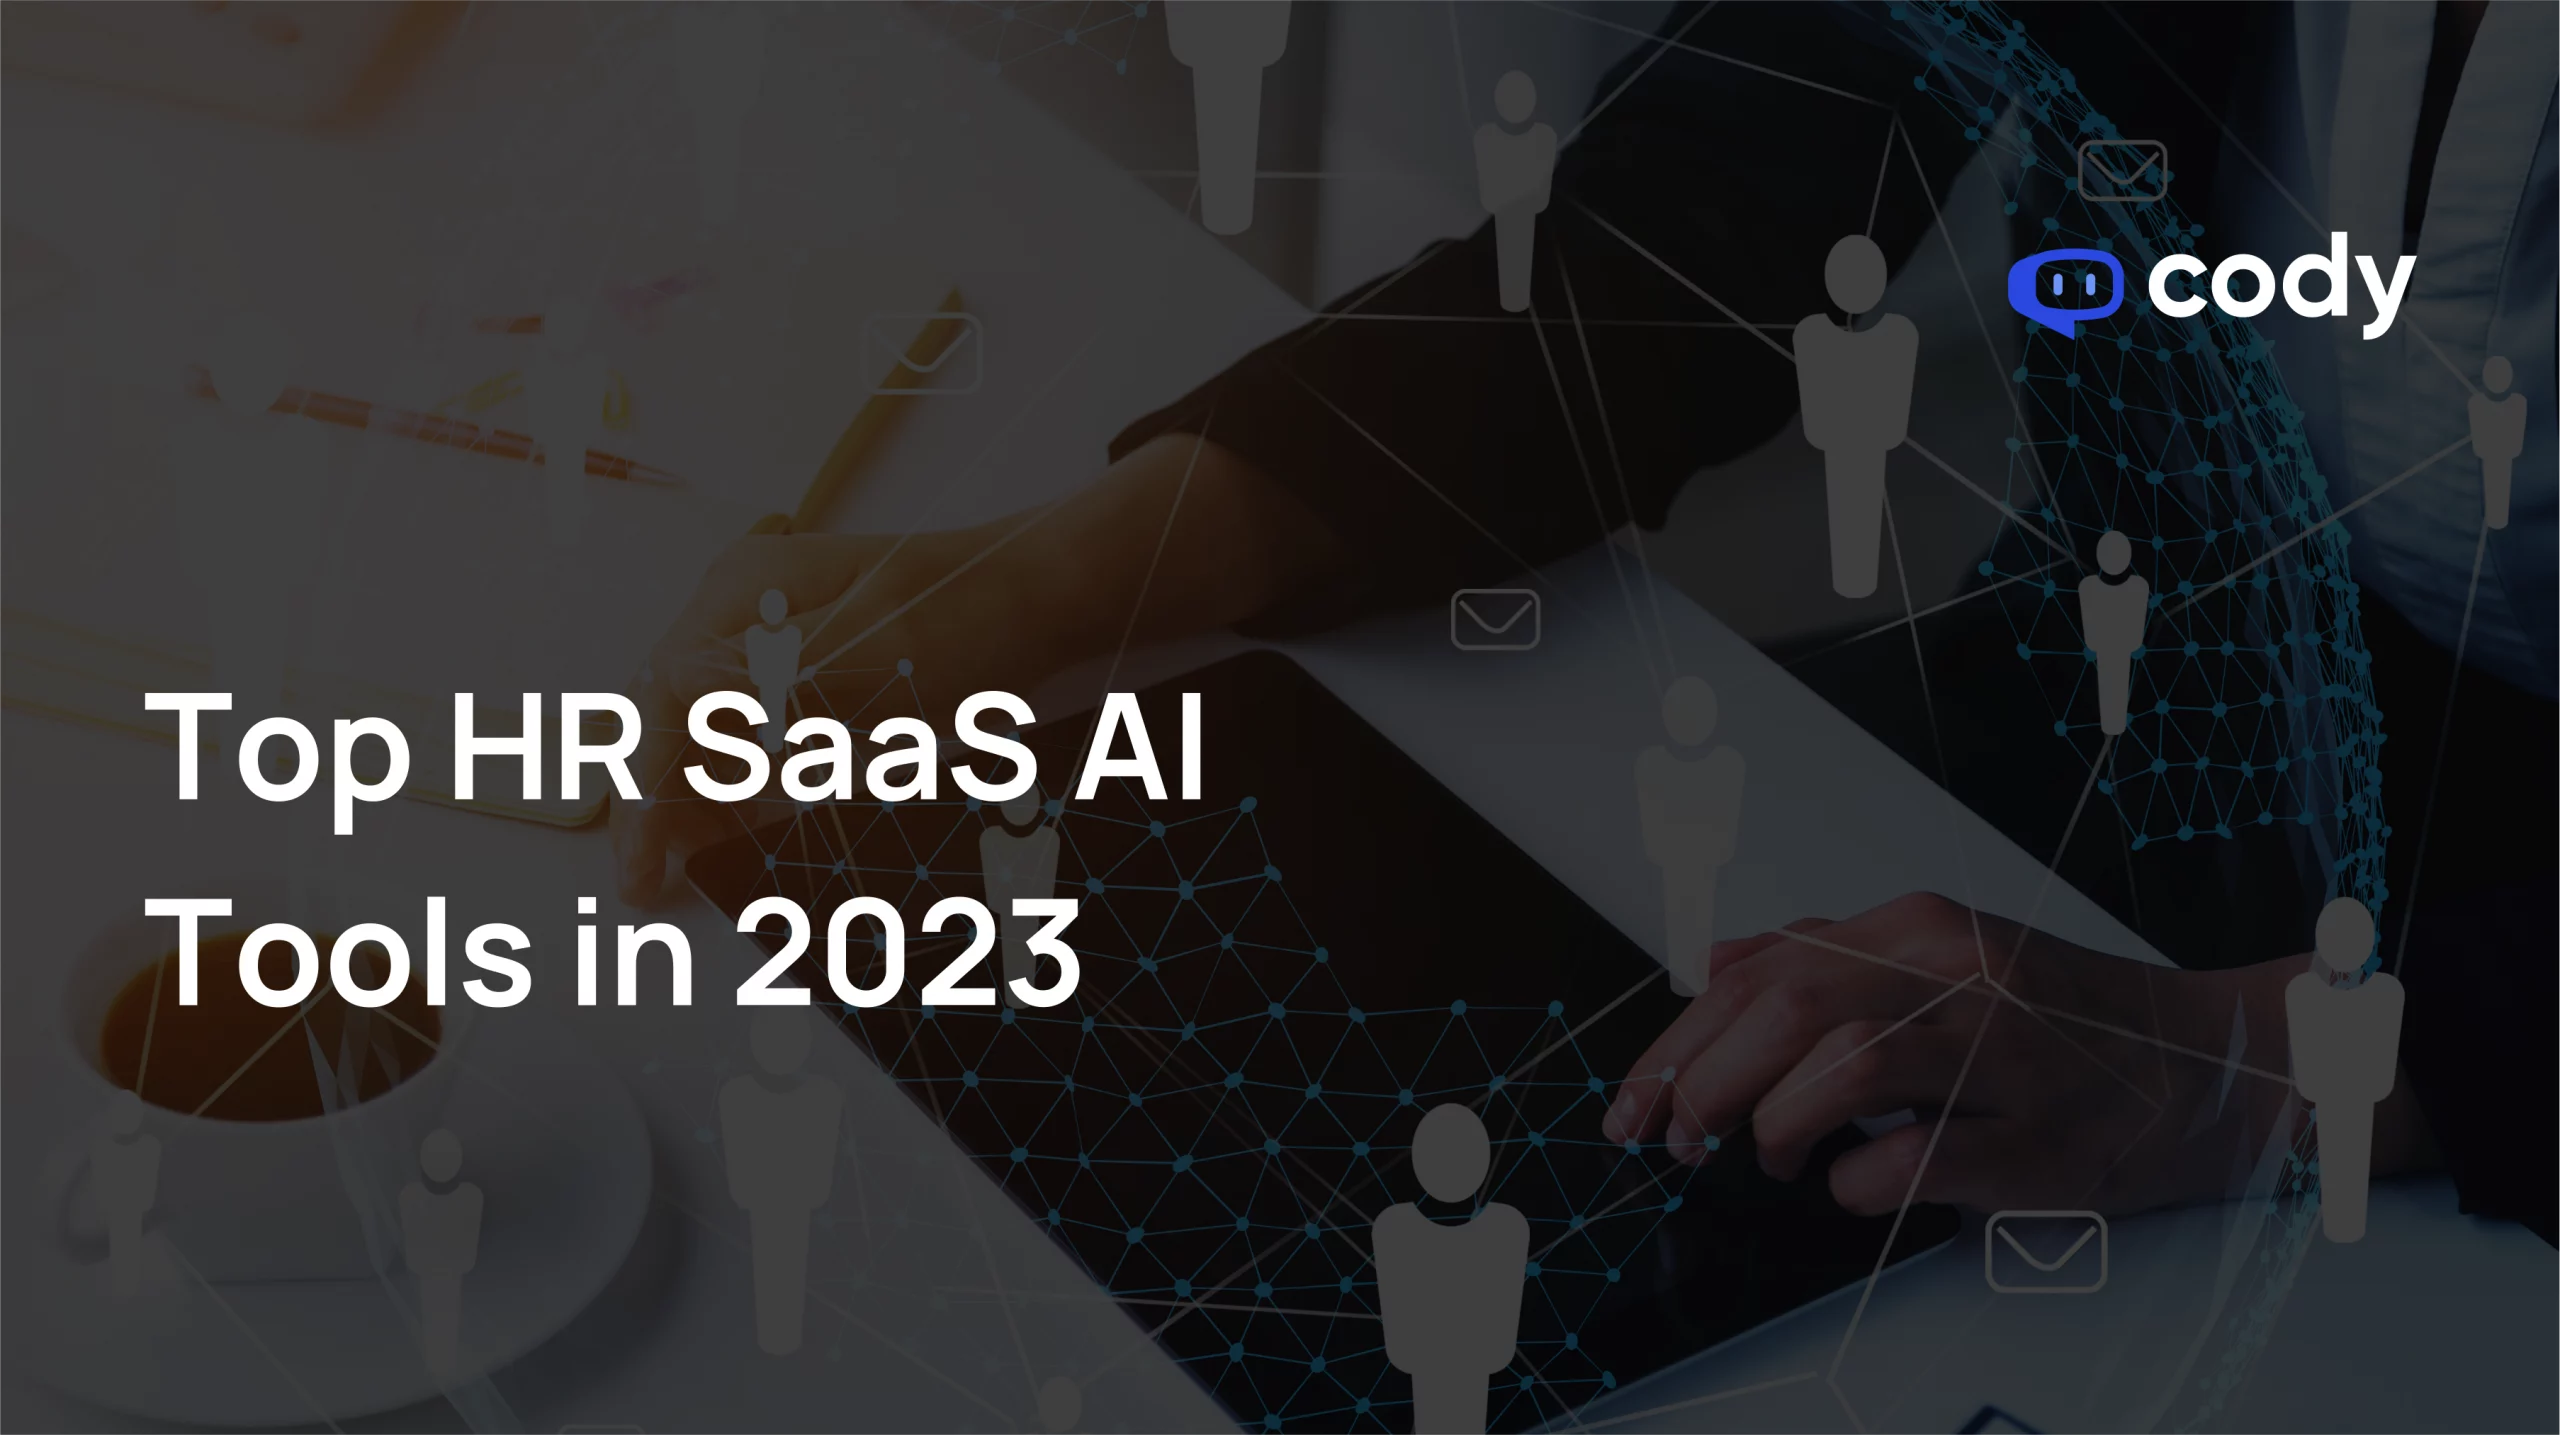 HR SaaS AI tools and software are cloud-based solutions that leverage artificial intelligence (AI) to enhance various aspects of human resources management.